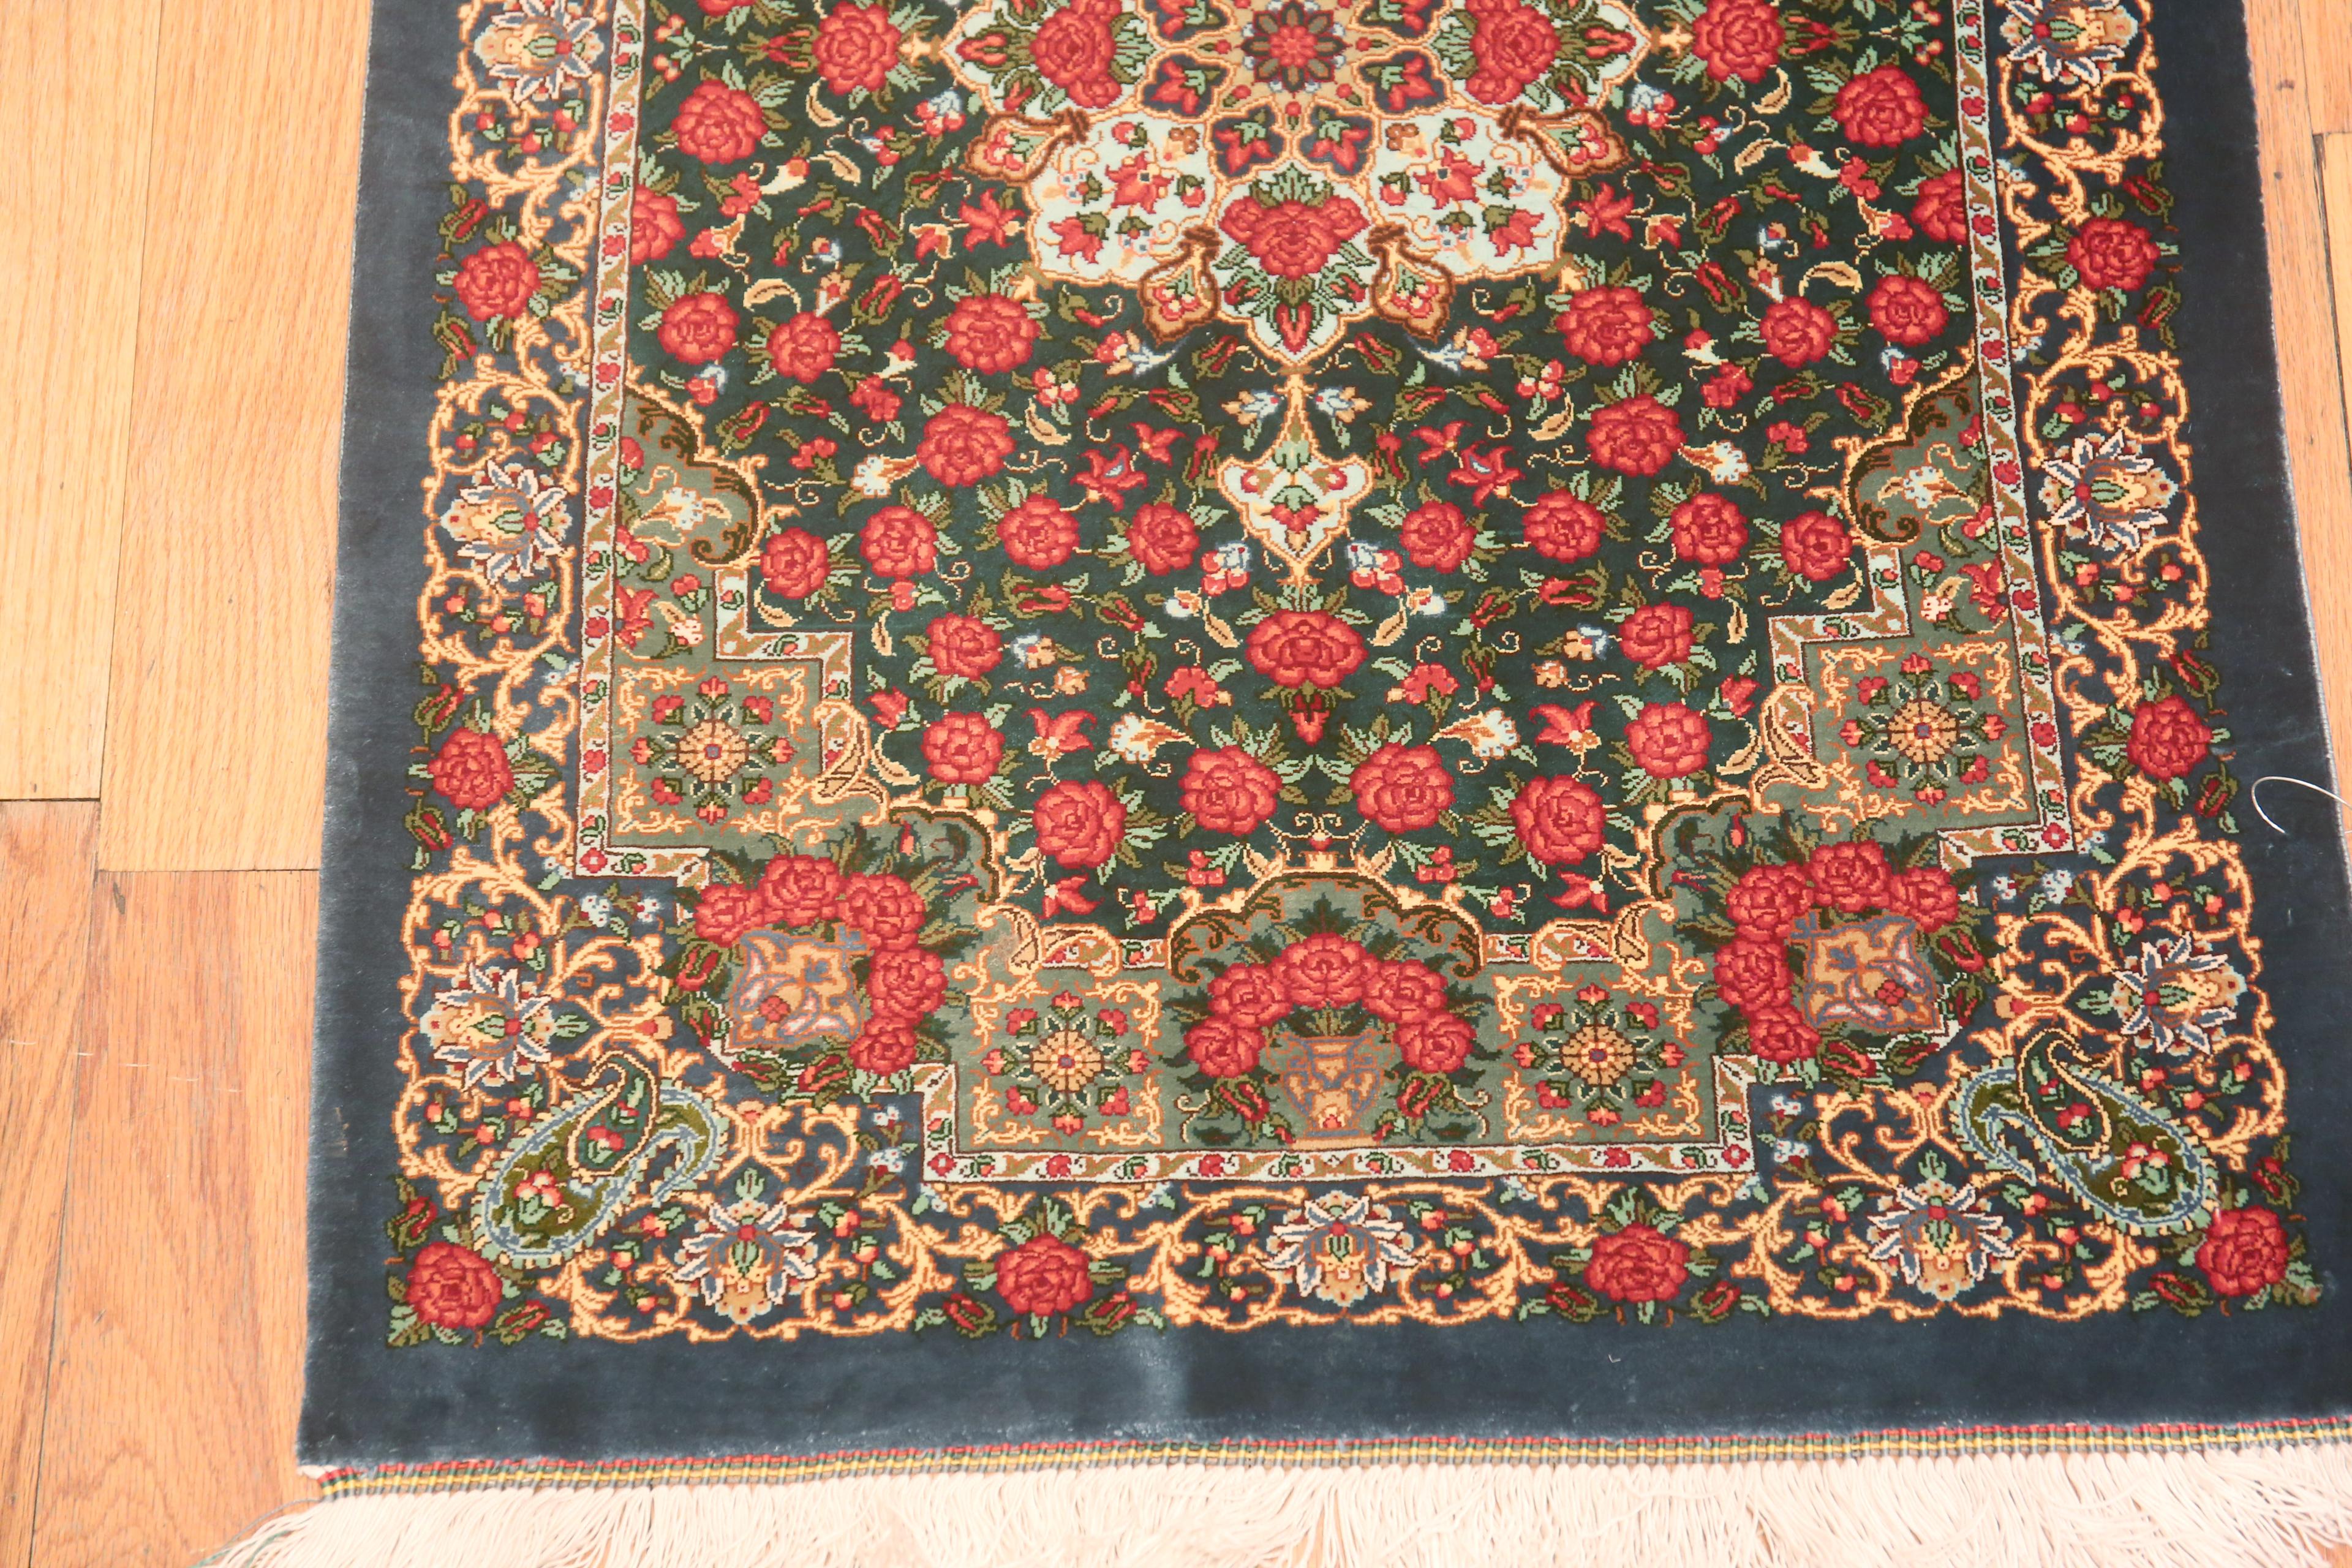 Fine Small Green Floral Vintage Persian Silk Qum Rug, country of origin: Persian Rugs, Circa date: Vintage 